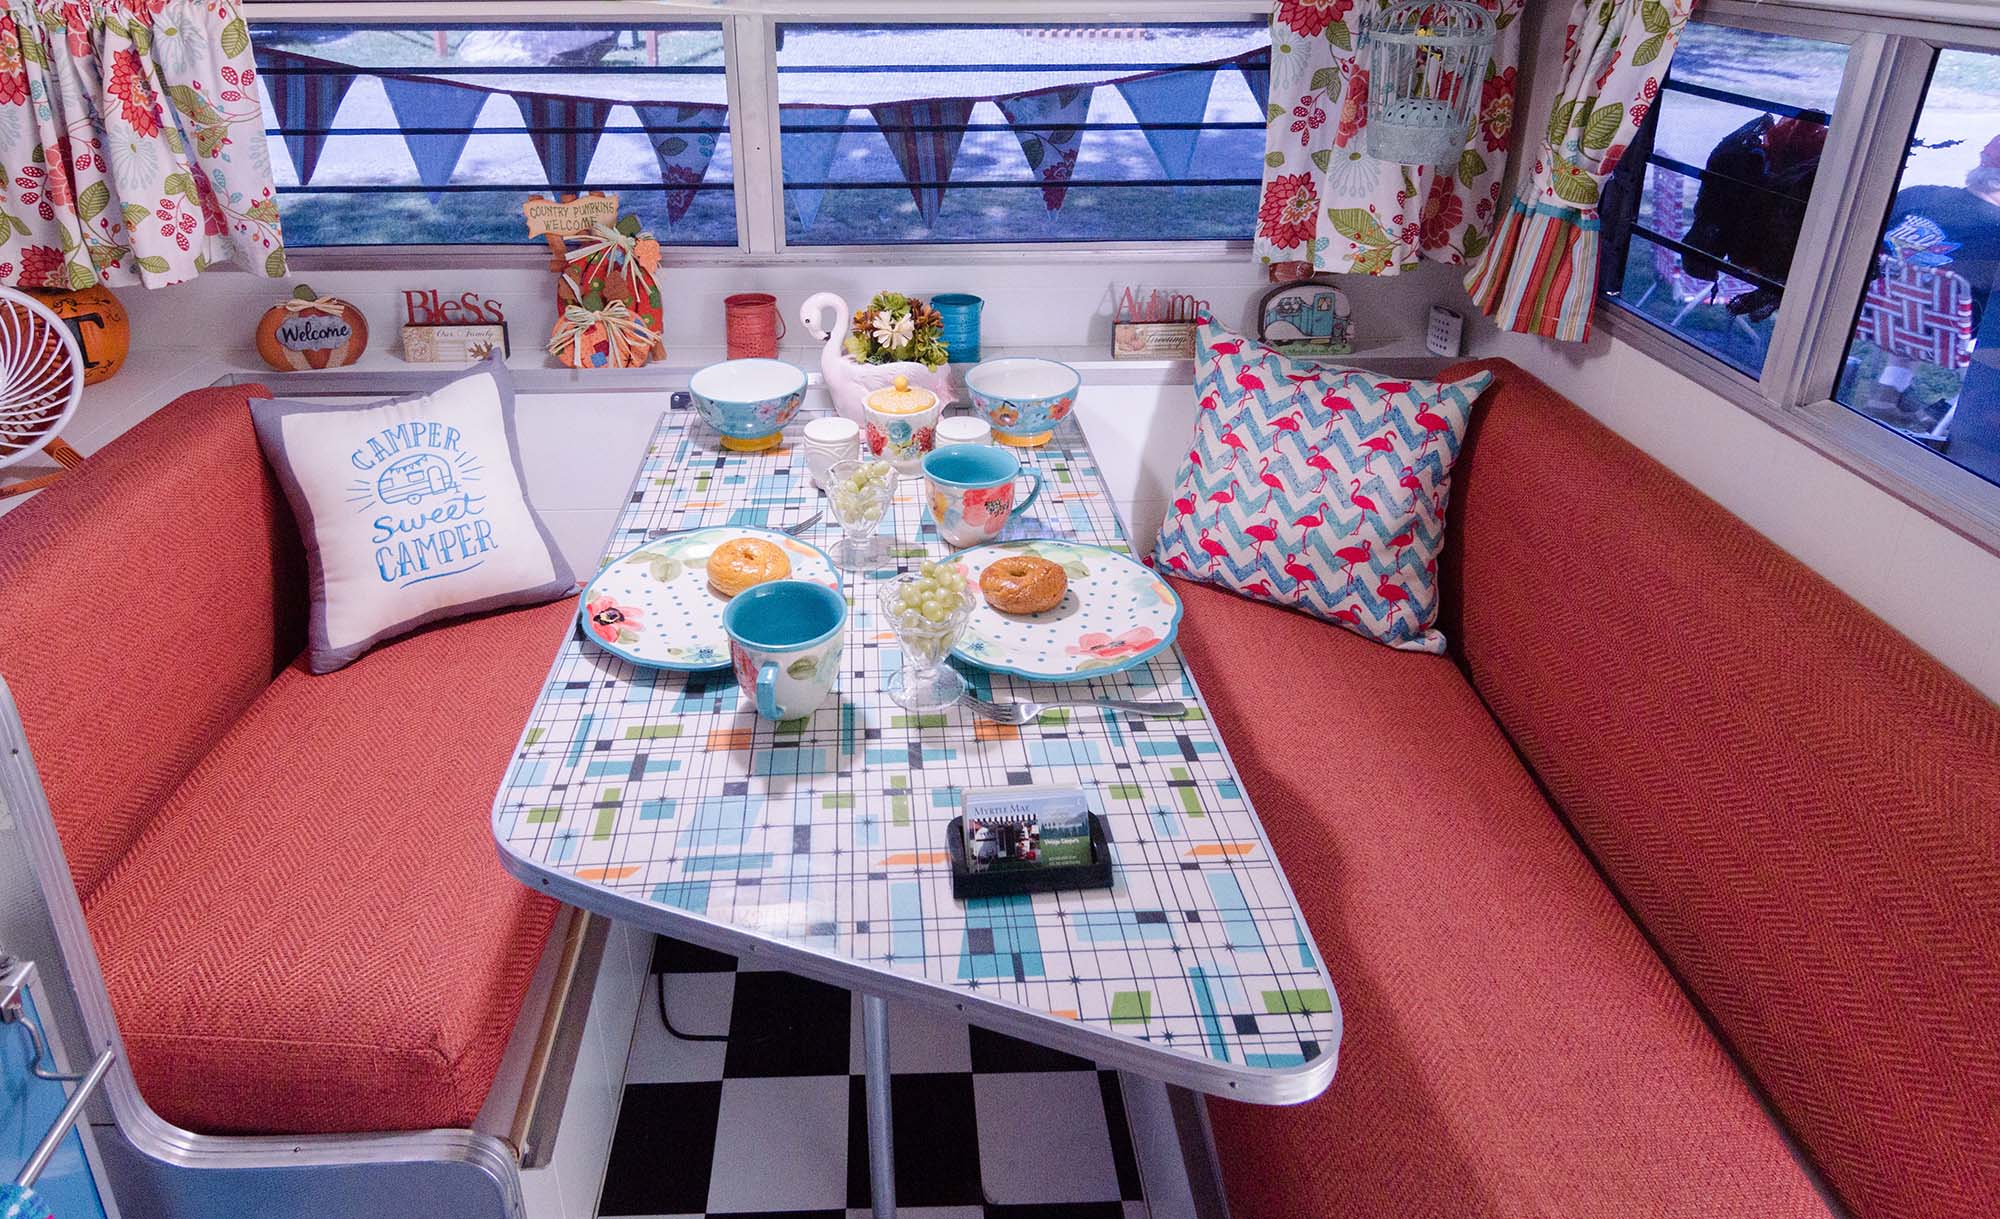 interior view of an eating area in a vintage trailer.